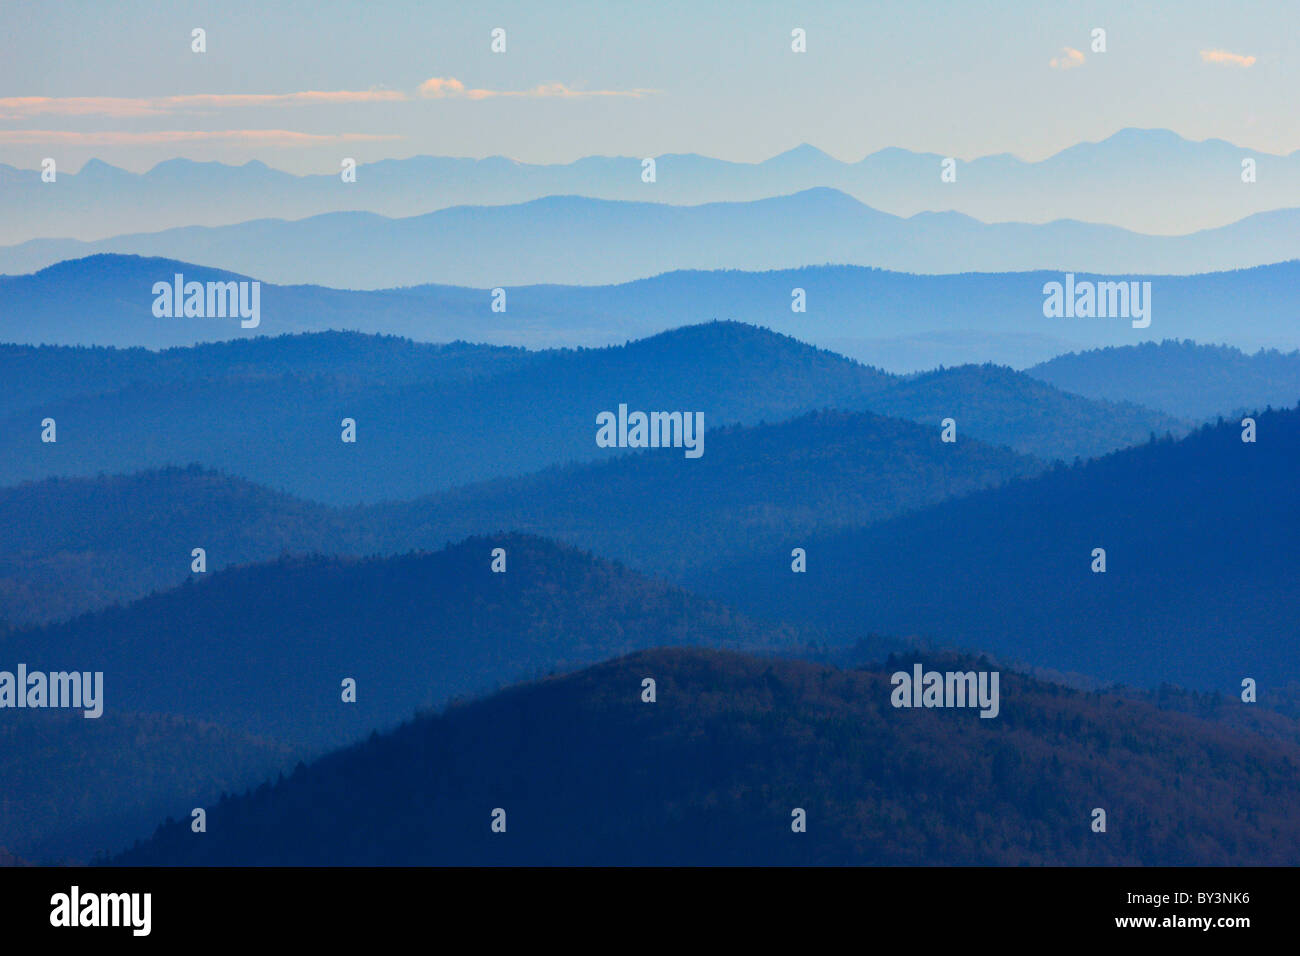 Waves of mountains in blue. Stock Photo